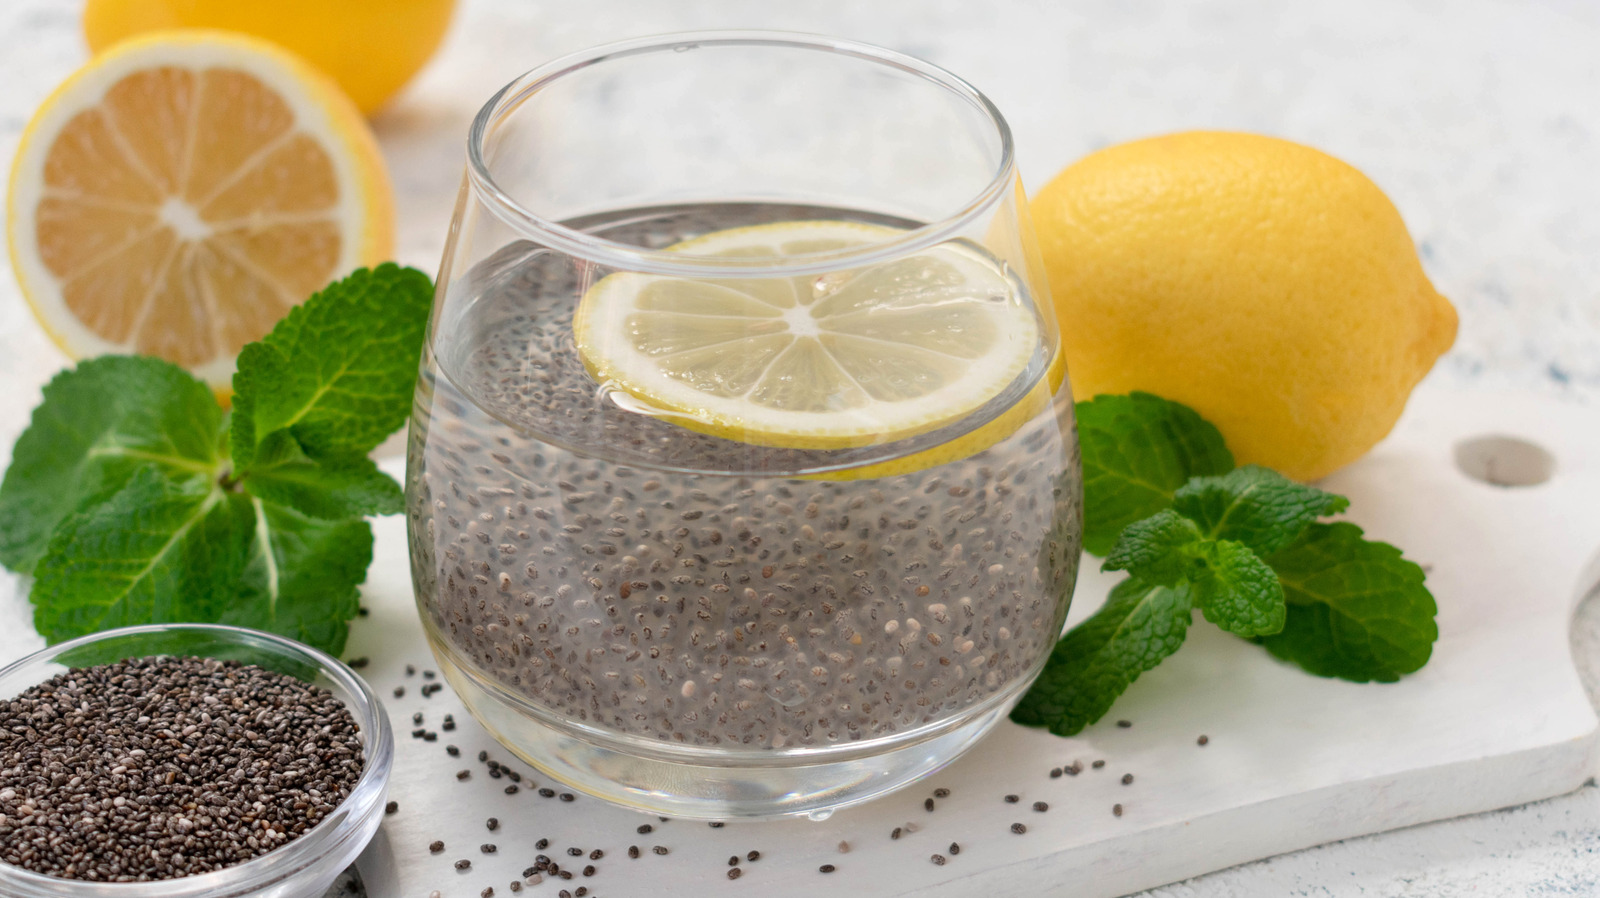 Chia Seeds in Water May Help With Weight Loss by Filling You up: Experts